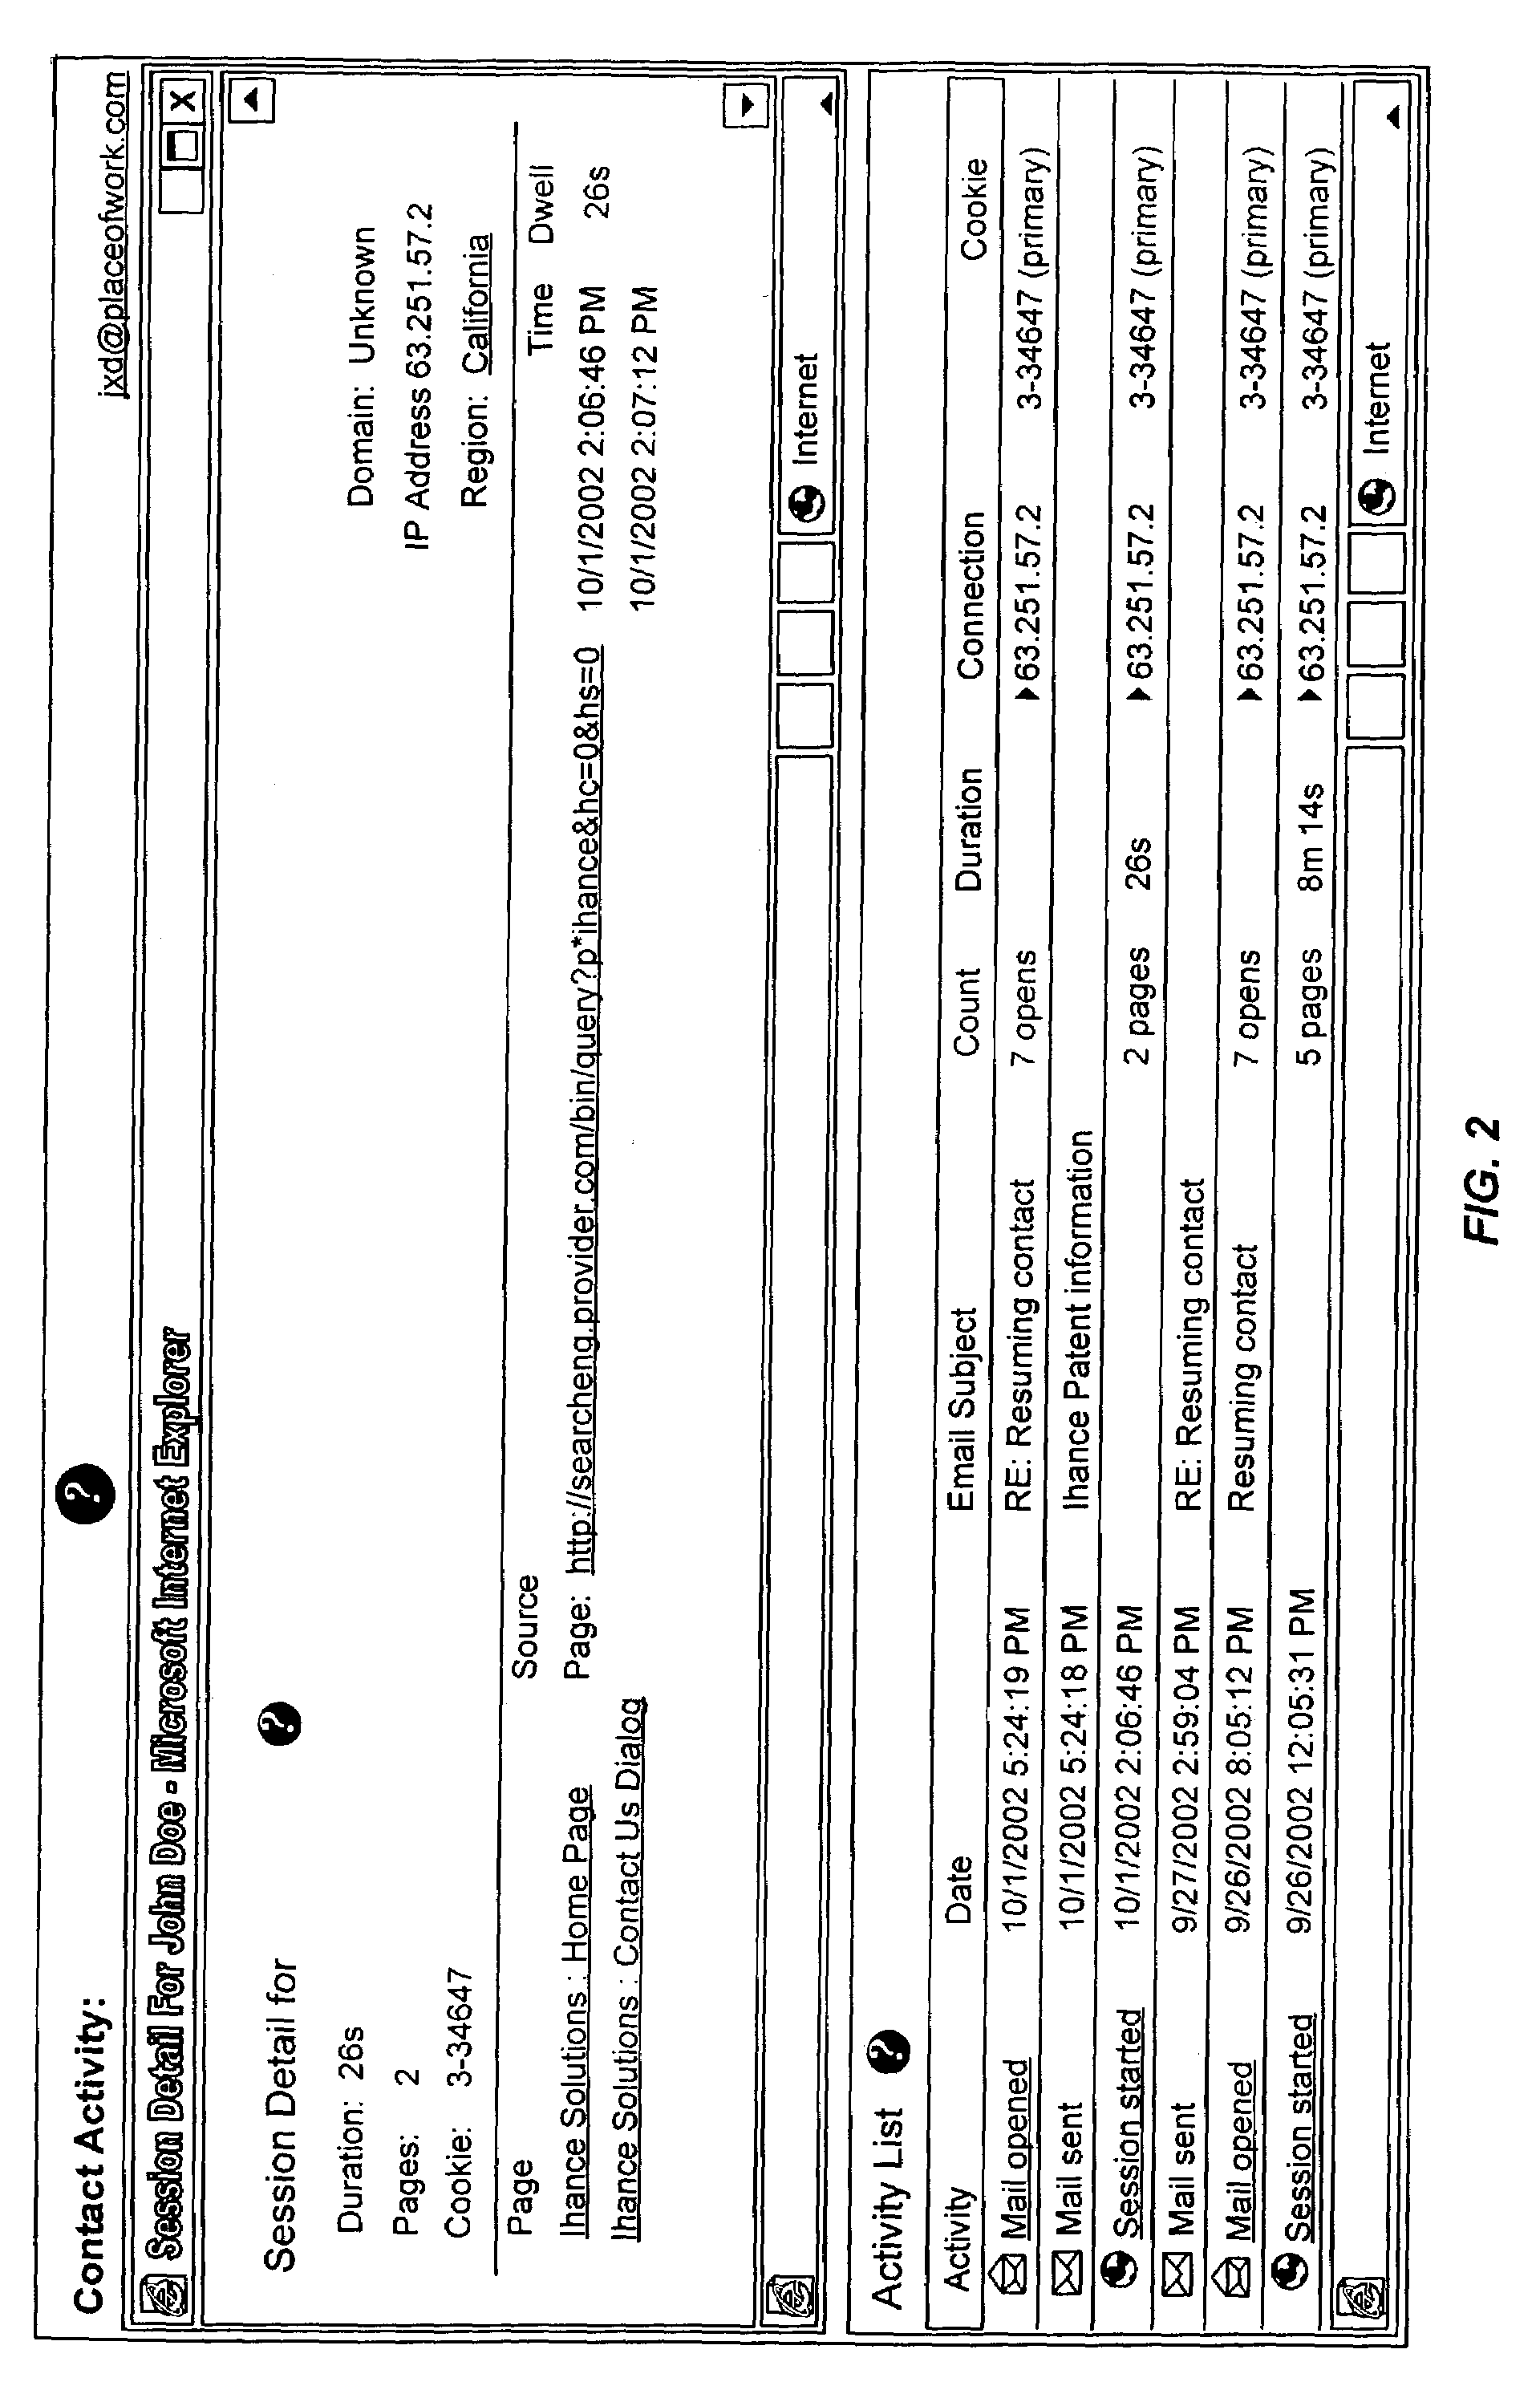 Method and system for monitoring e-mail and website behavior of an e-mail recipient